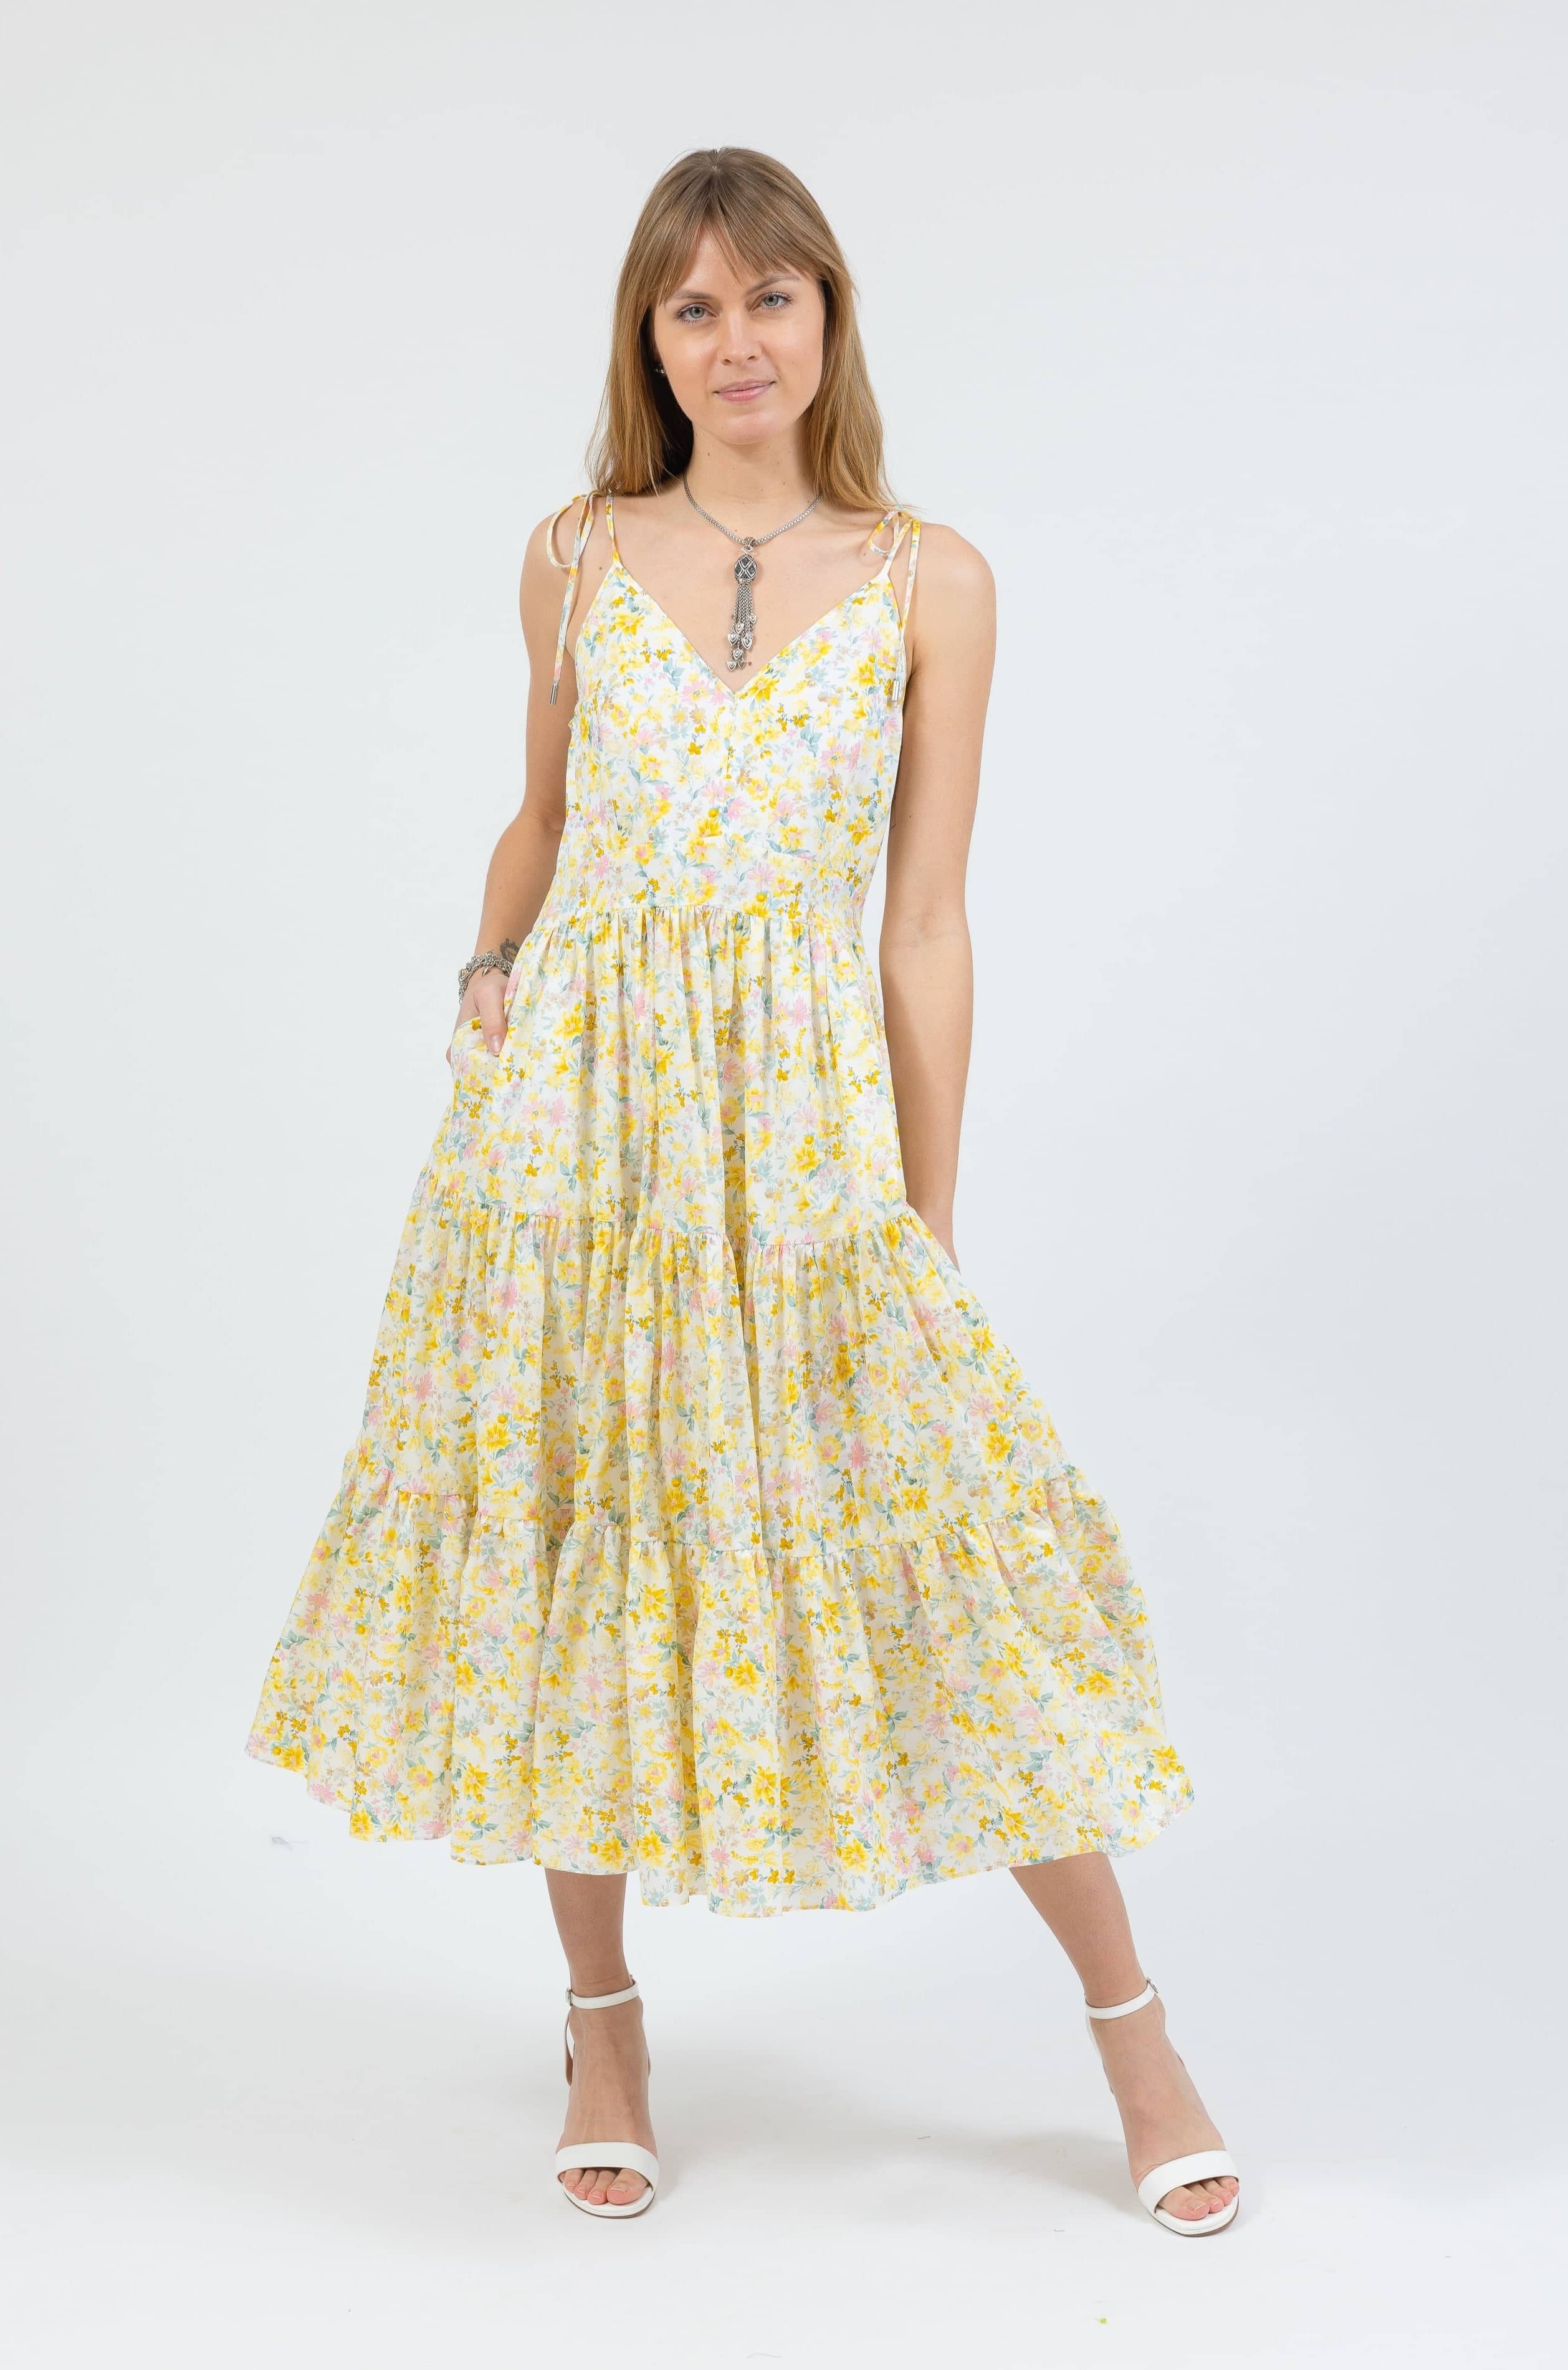 The Strappy Maxi Dress in Yellow Floral